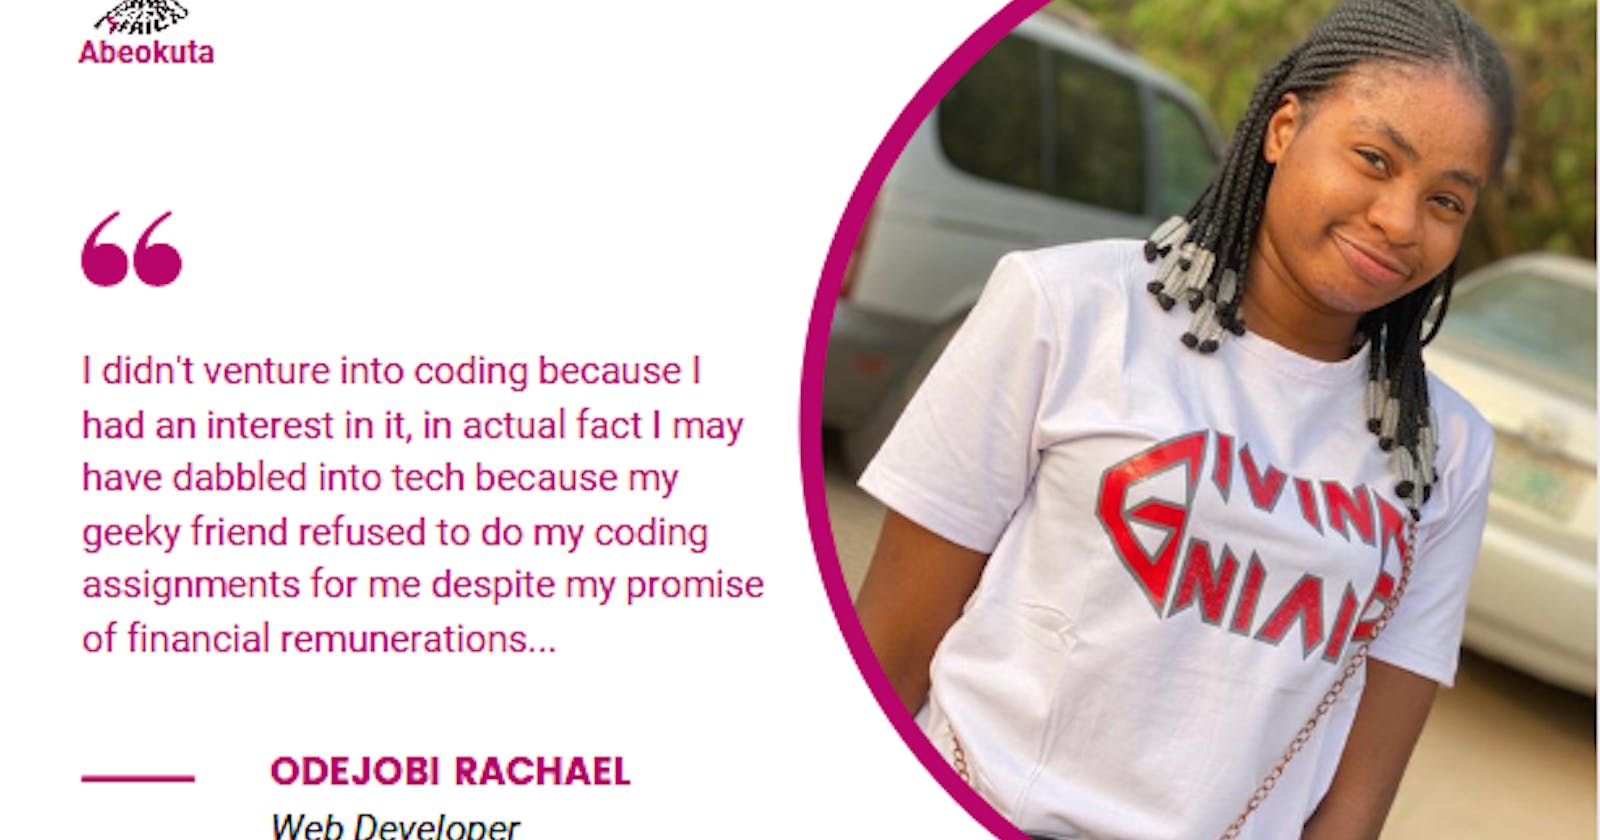 A chat with Odejobi Rachael...